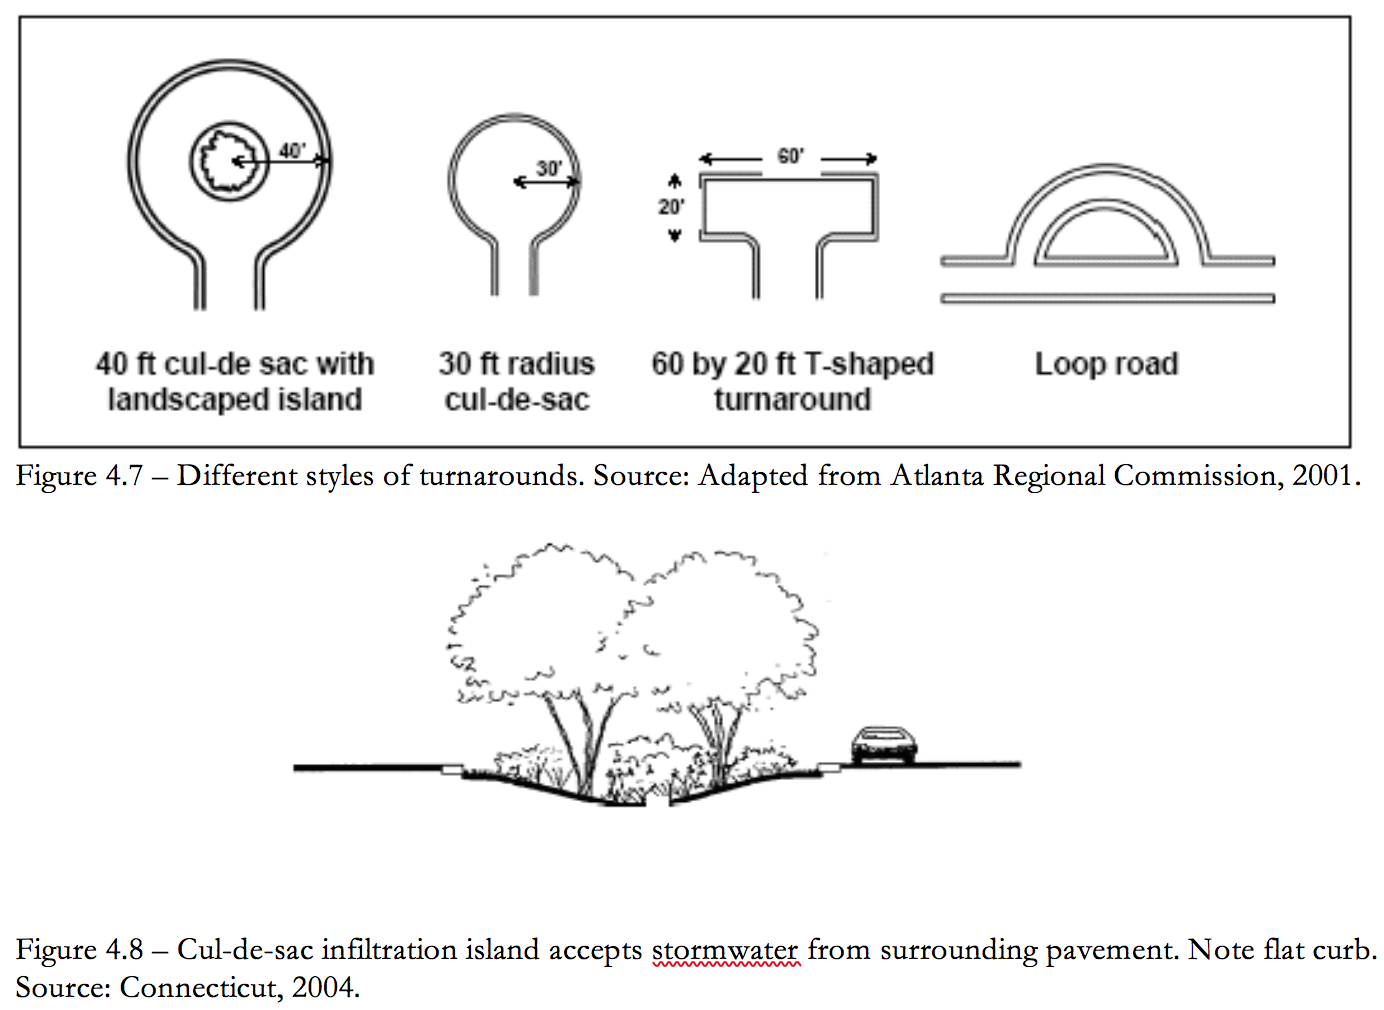 Figure 4.8 Cul-de-sac infiltration island accepts stormwater from surrounding pavement.